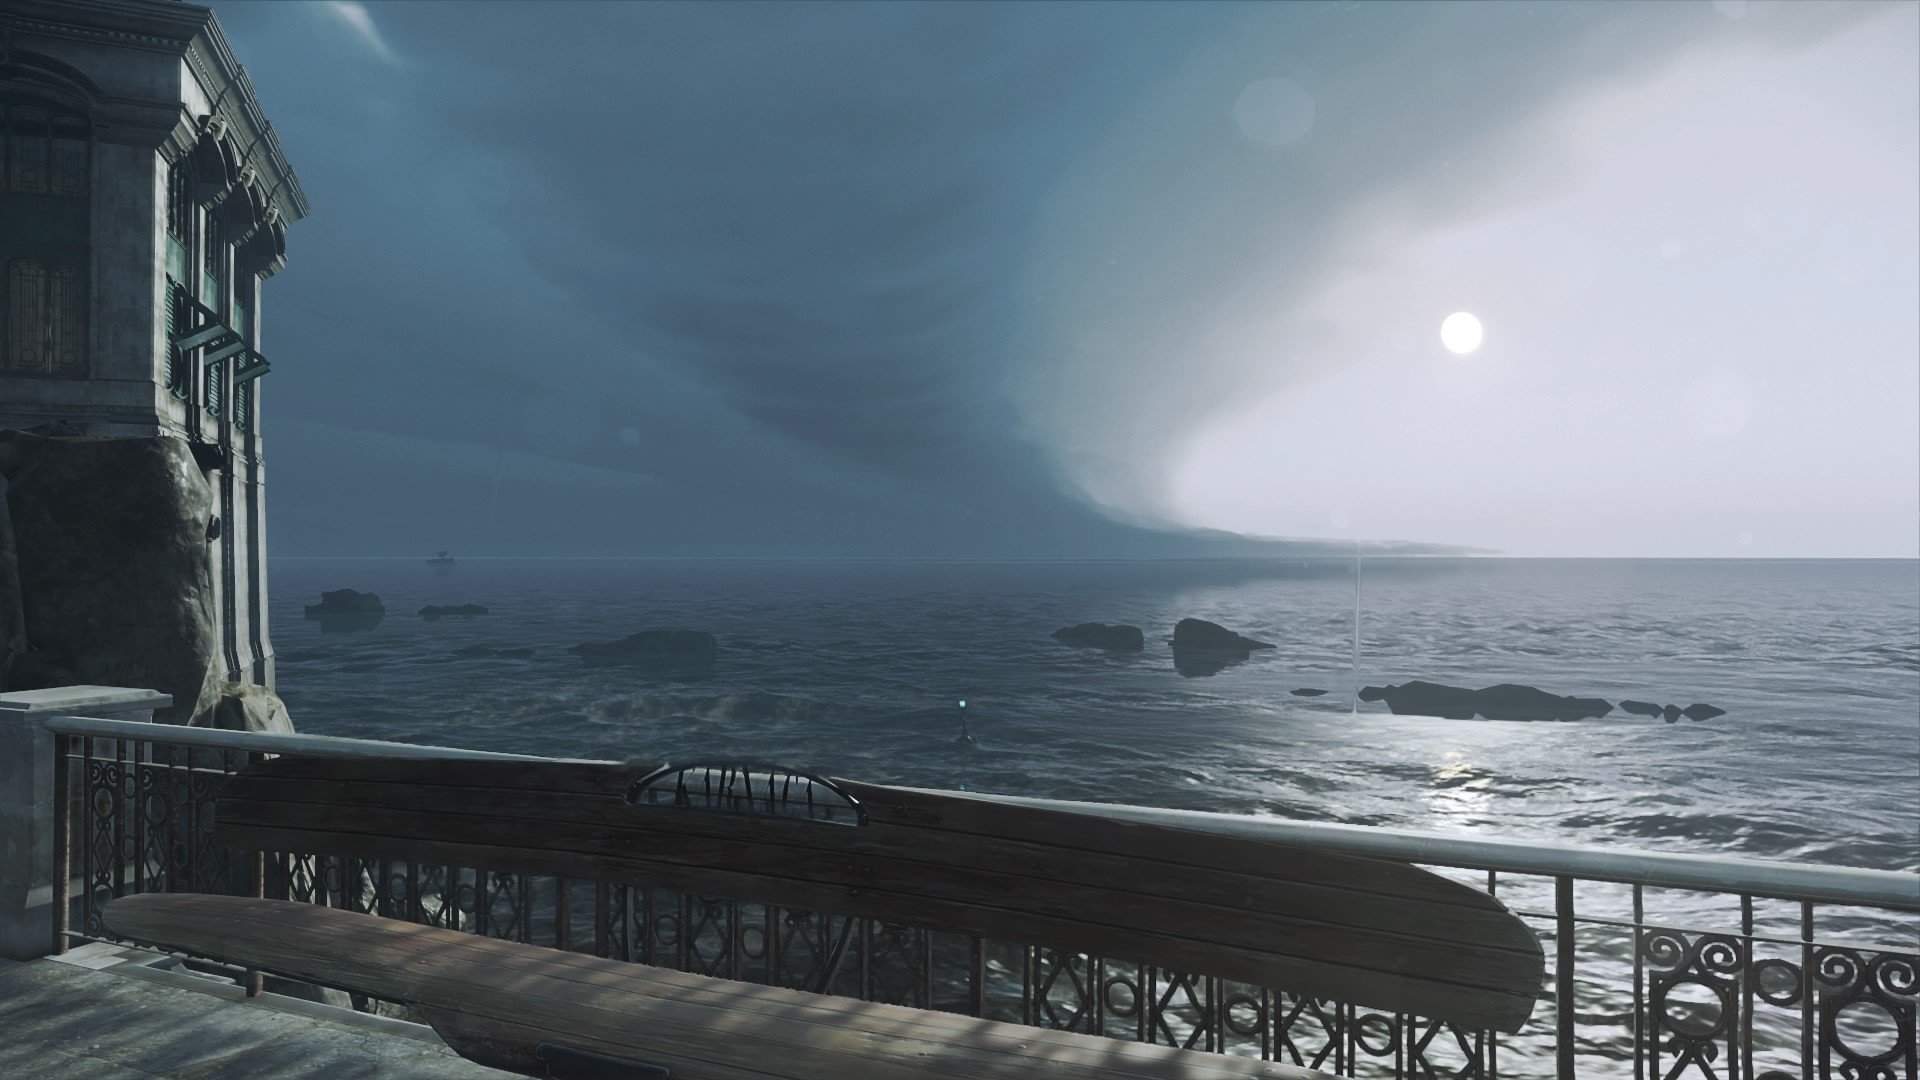 karnaka, Dishonored 2, Dishonored, Dunwall, Landscape, Sunflowers, Clouds, Bench, Coast, Island, Steampunk Wallpaper